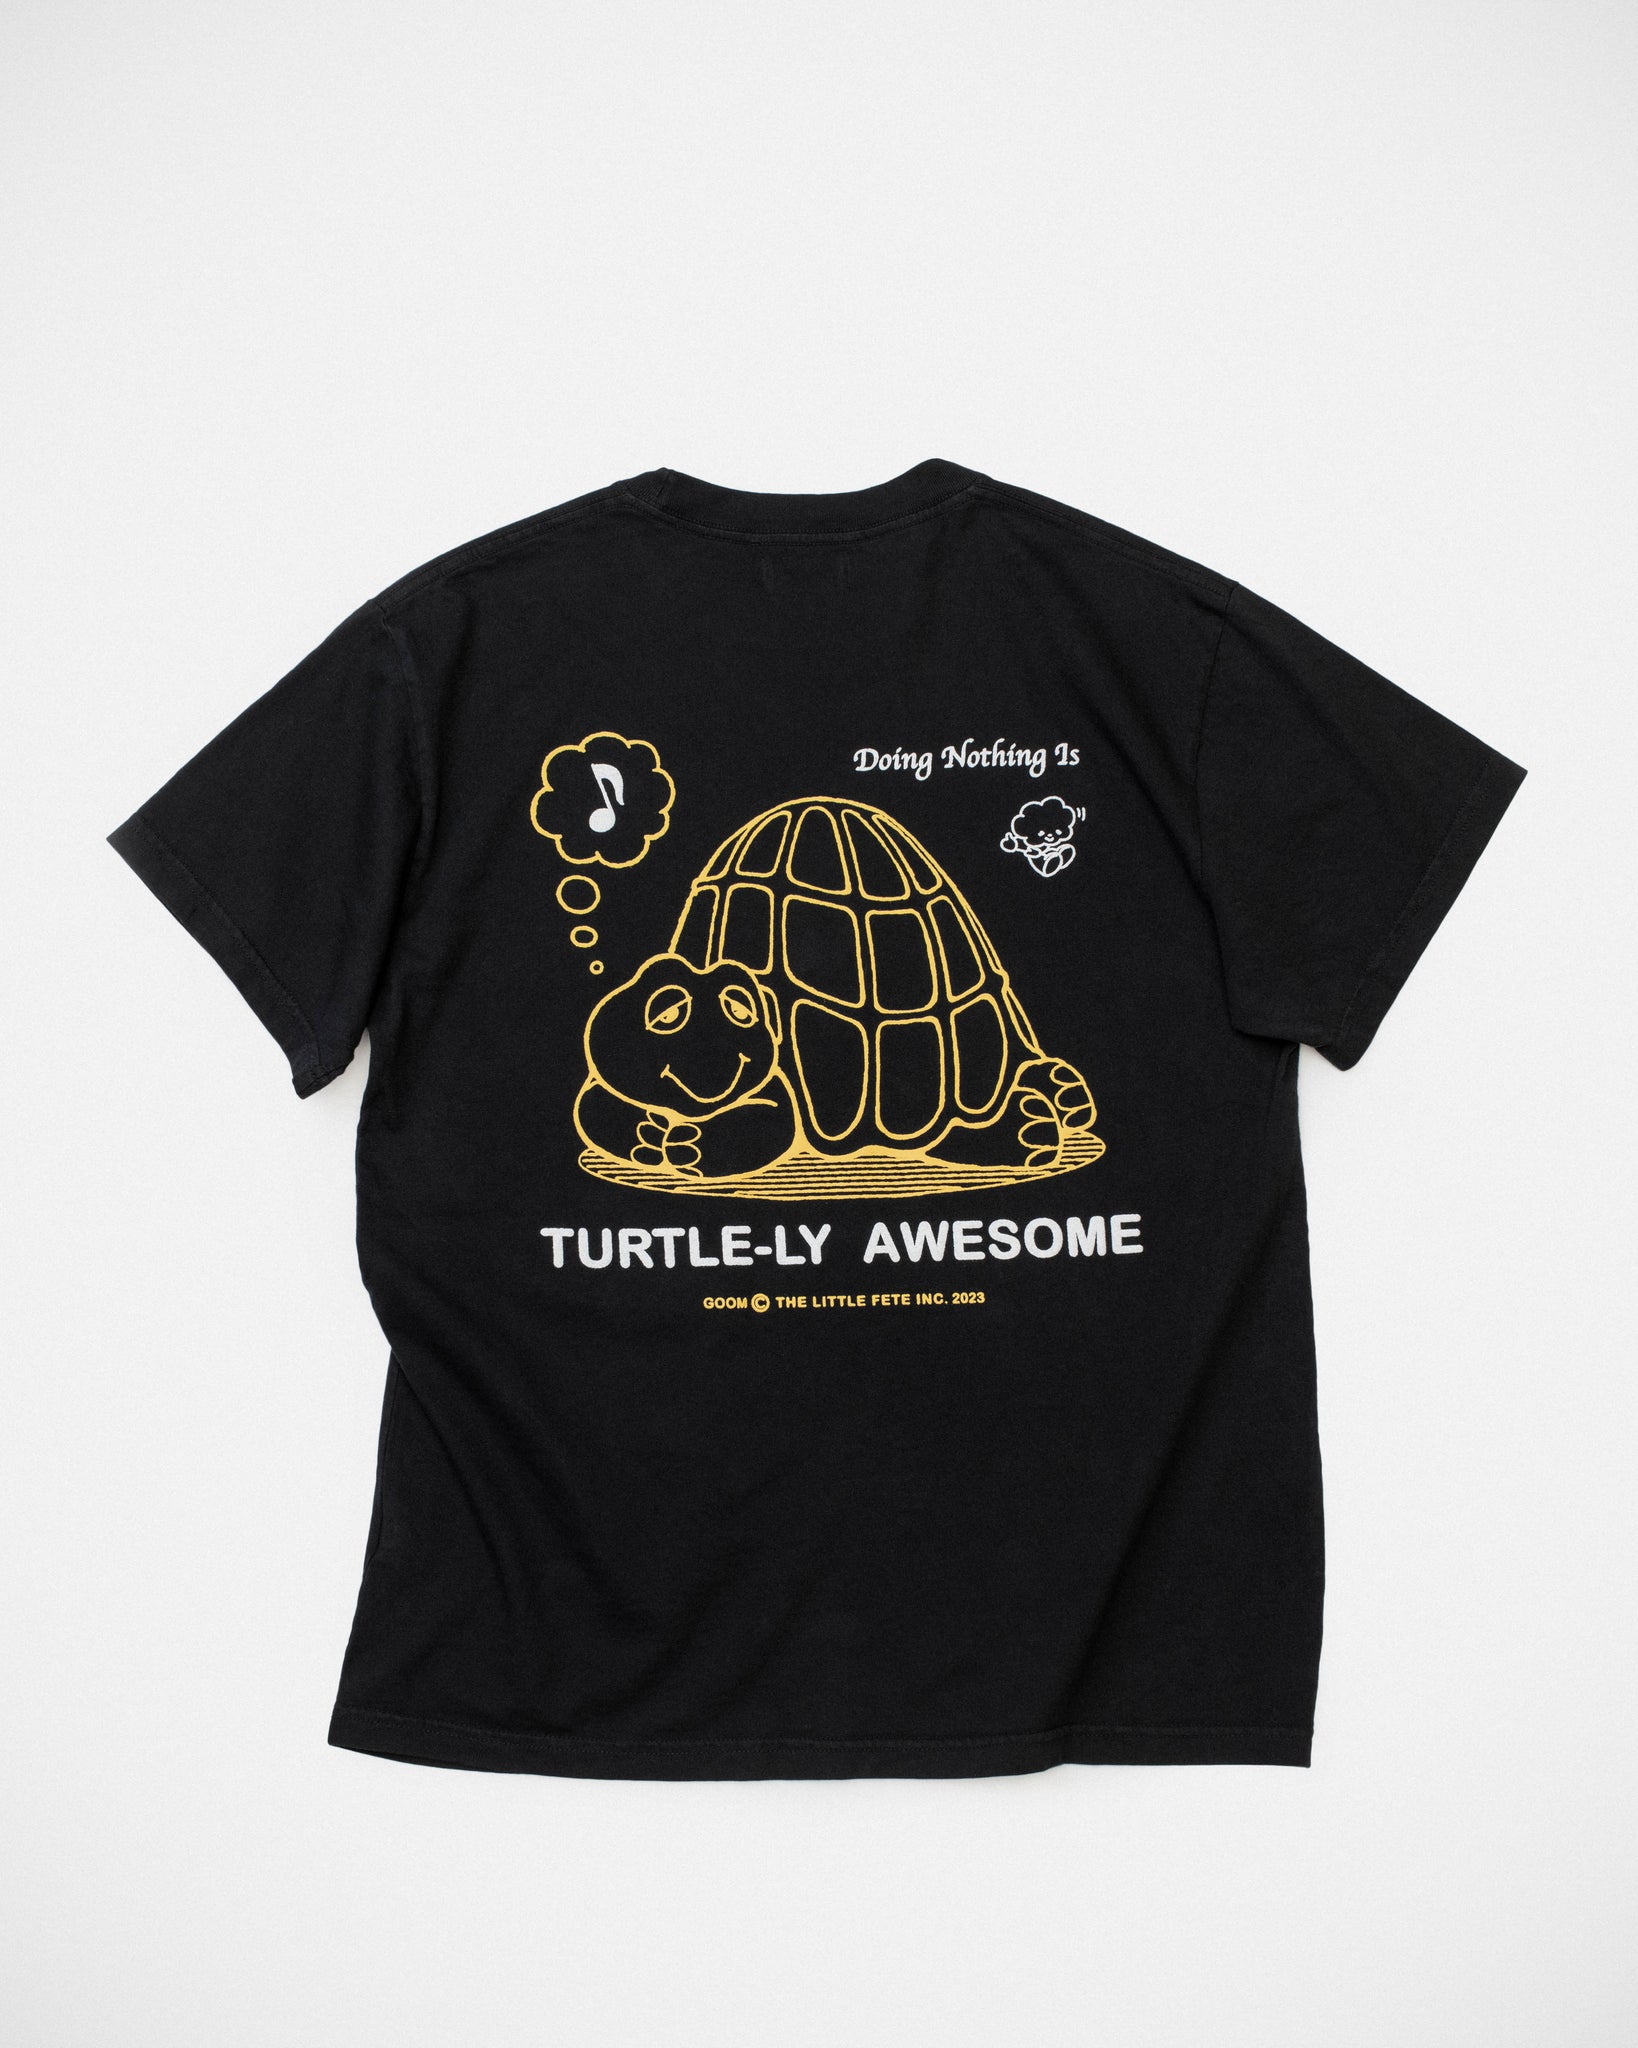 Turtle-ly Awesome Tee - Black